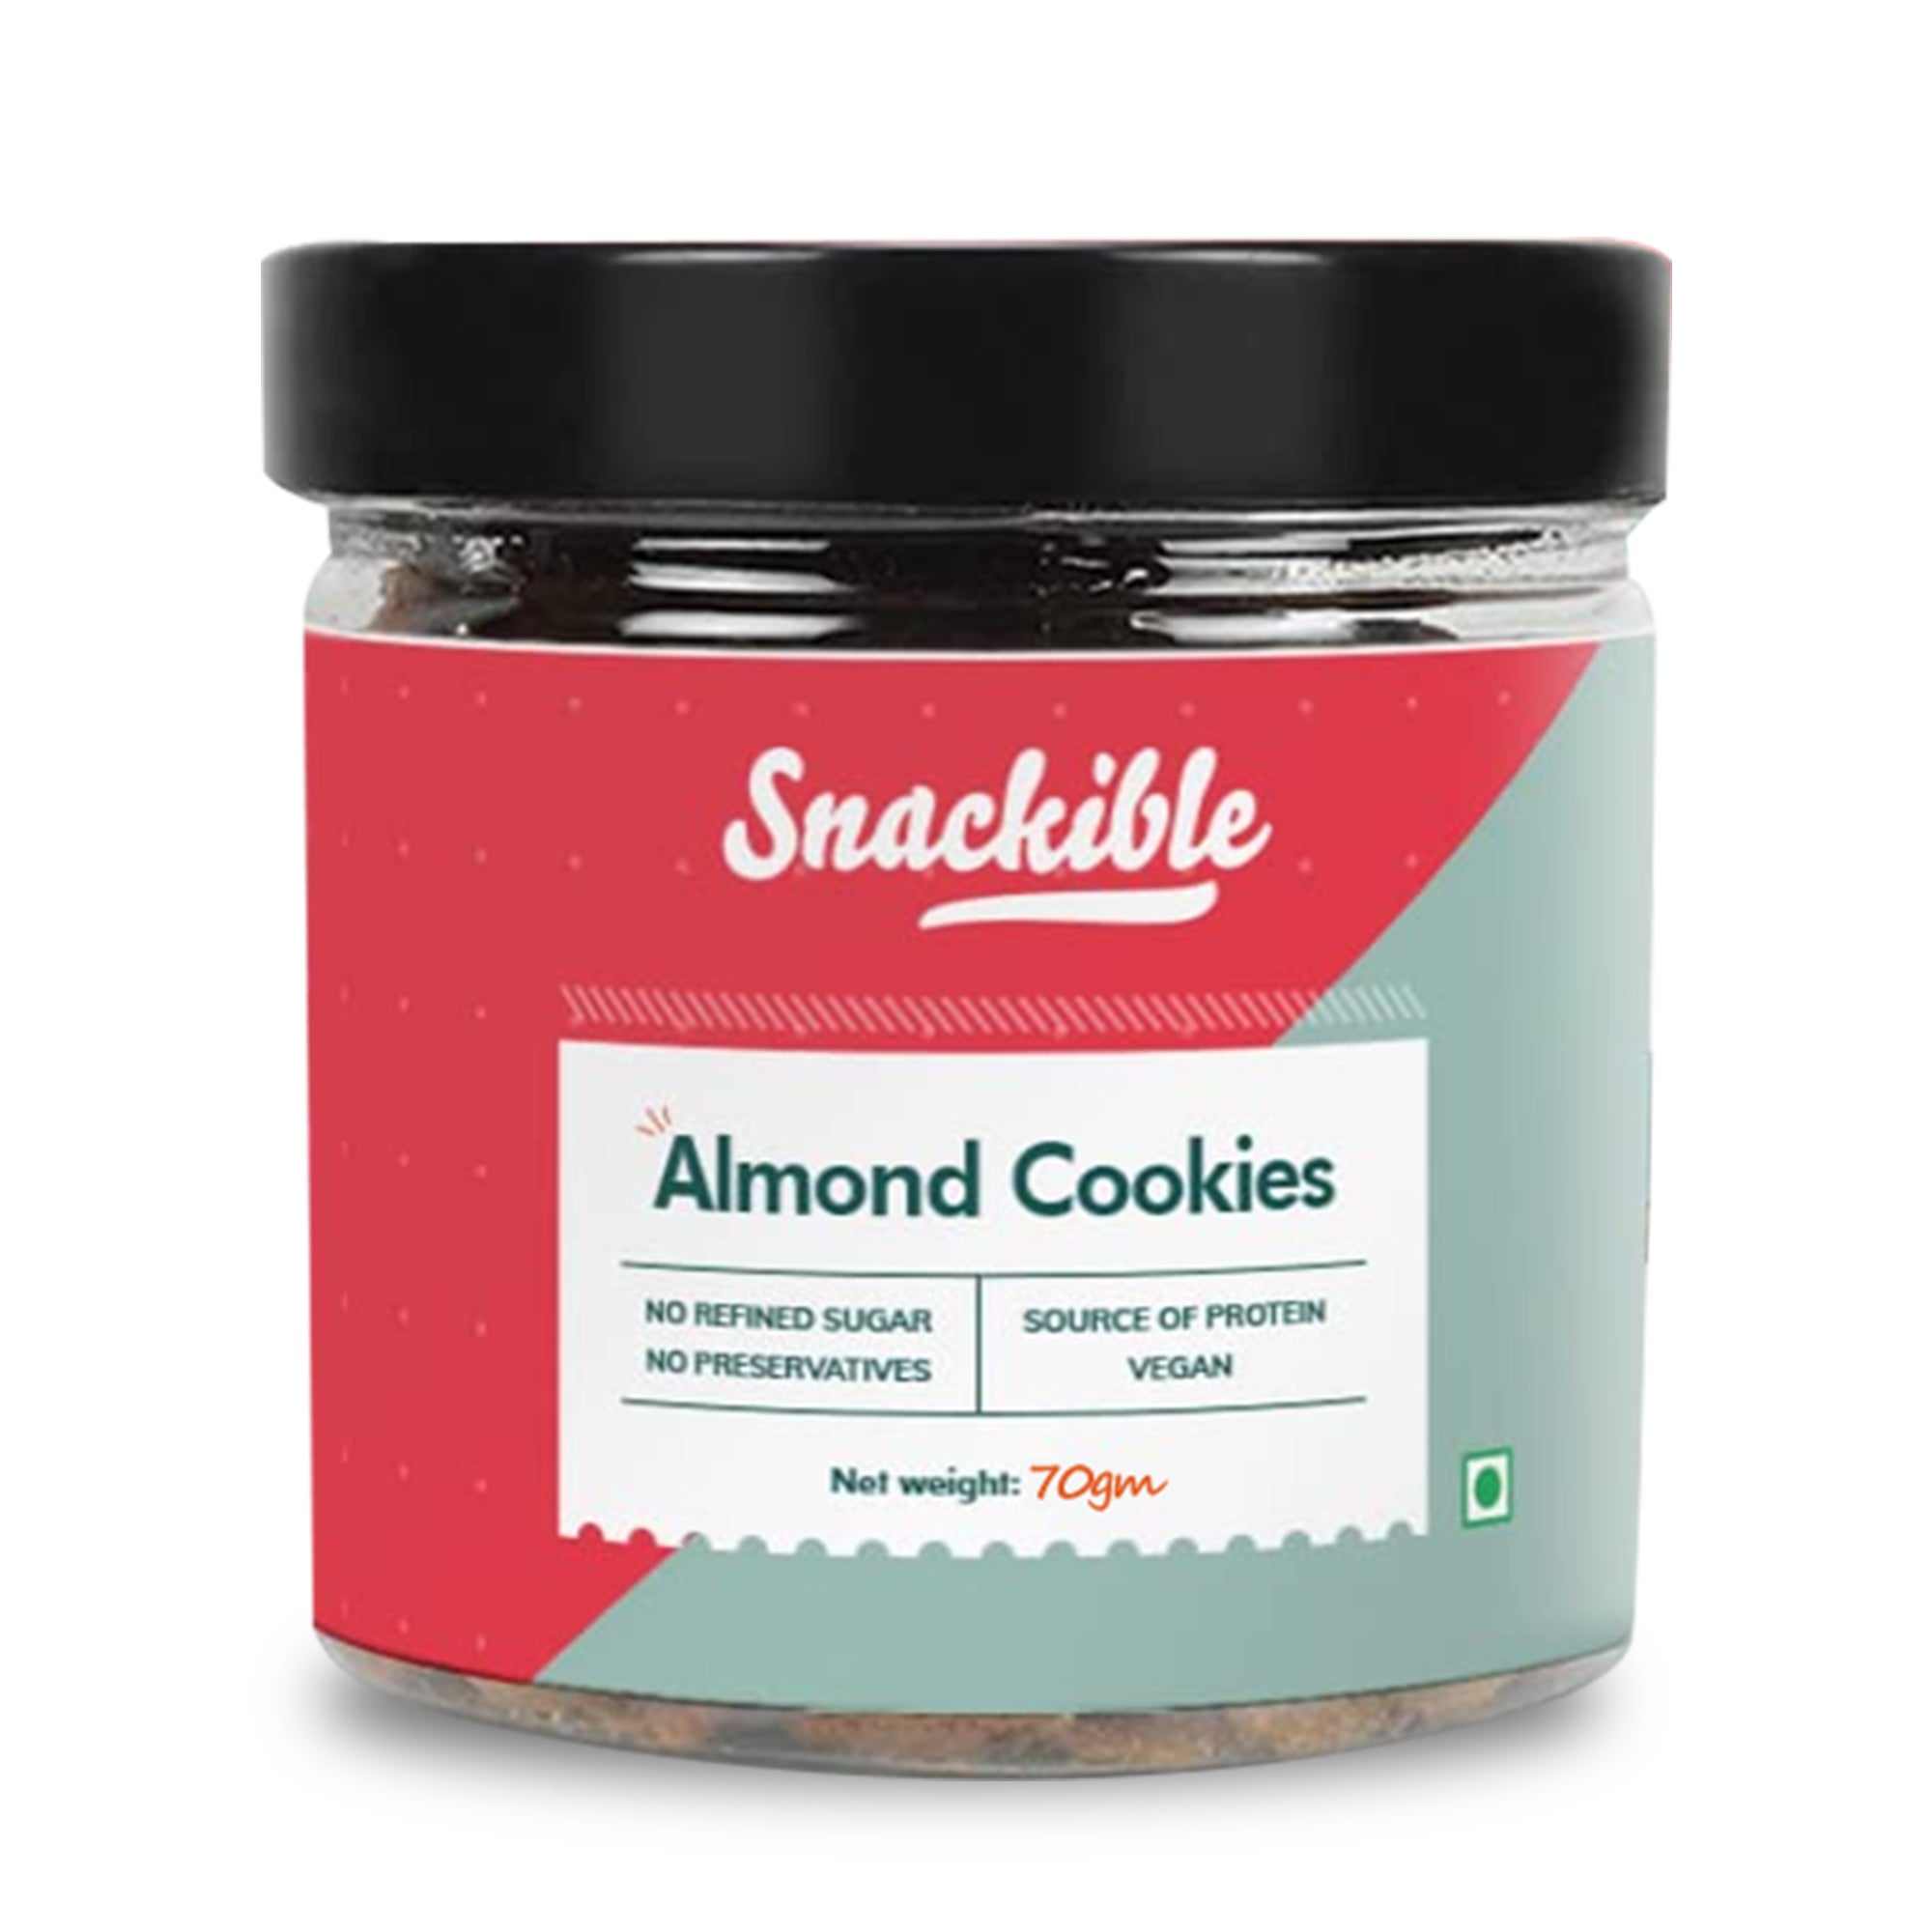 Snackible Almond Cookies - 70gm | Pack of 4